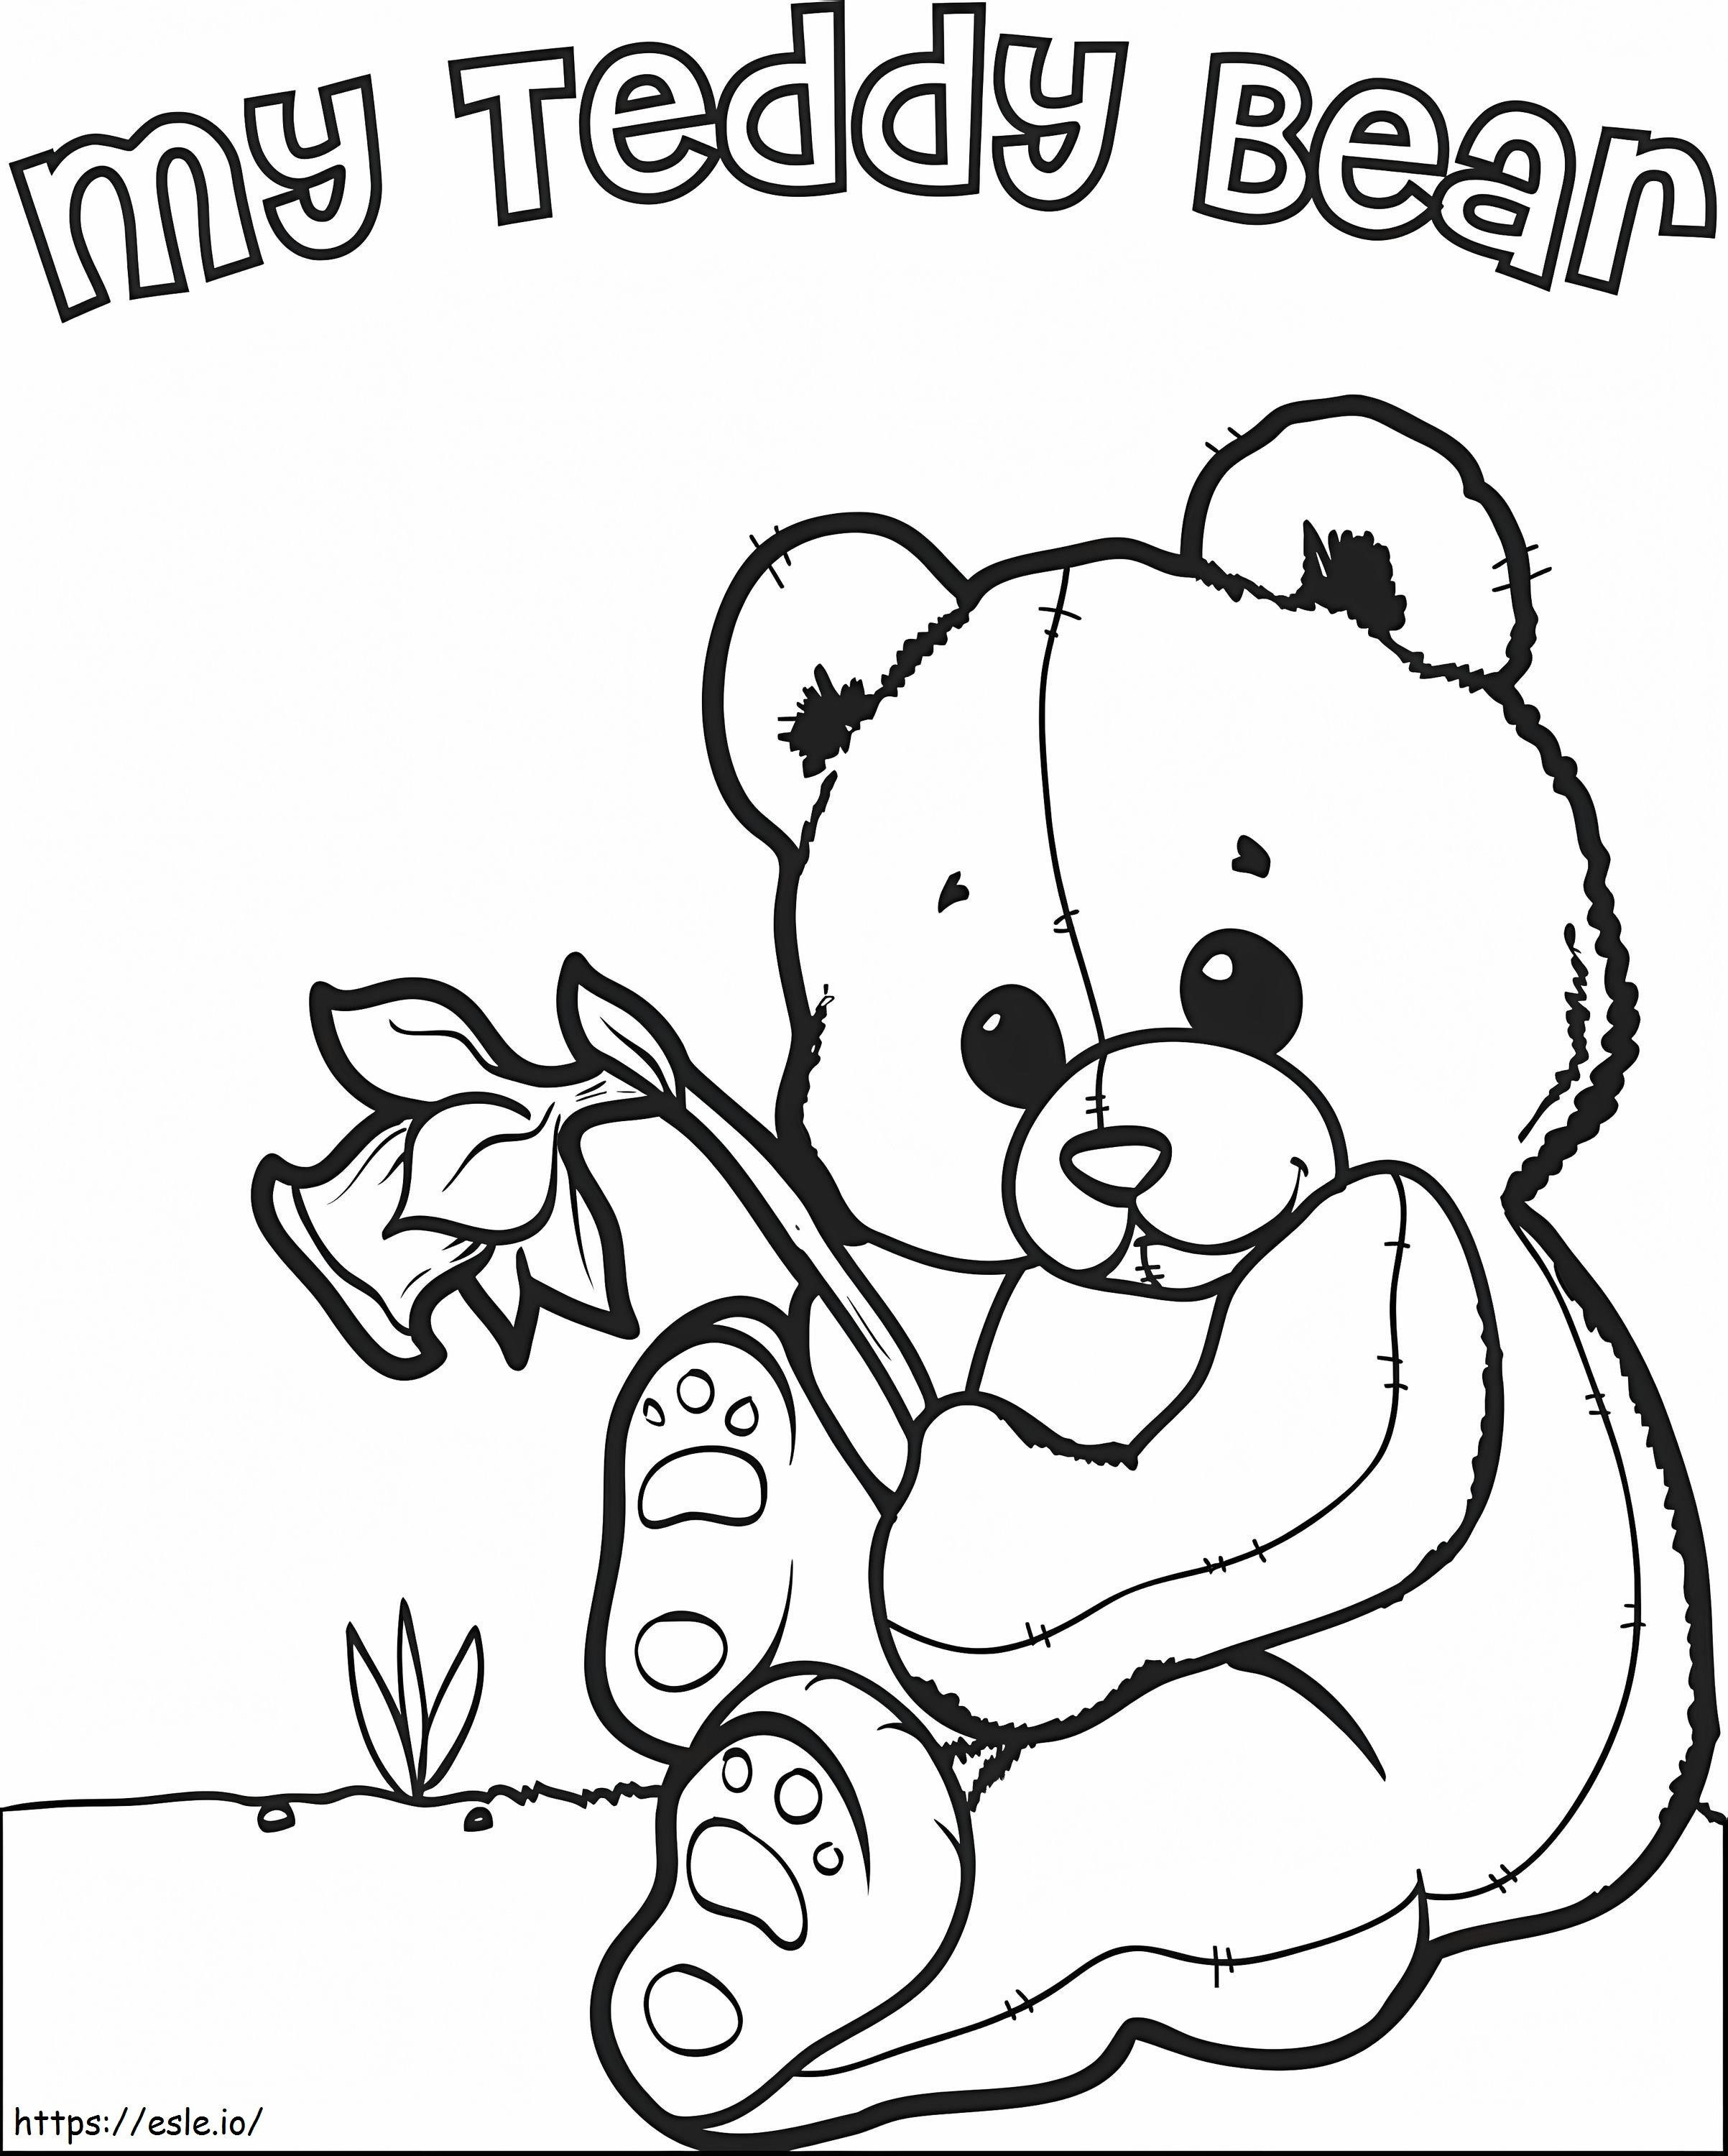 Teddy Bear And Rose coloring page